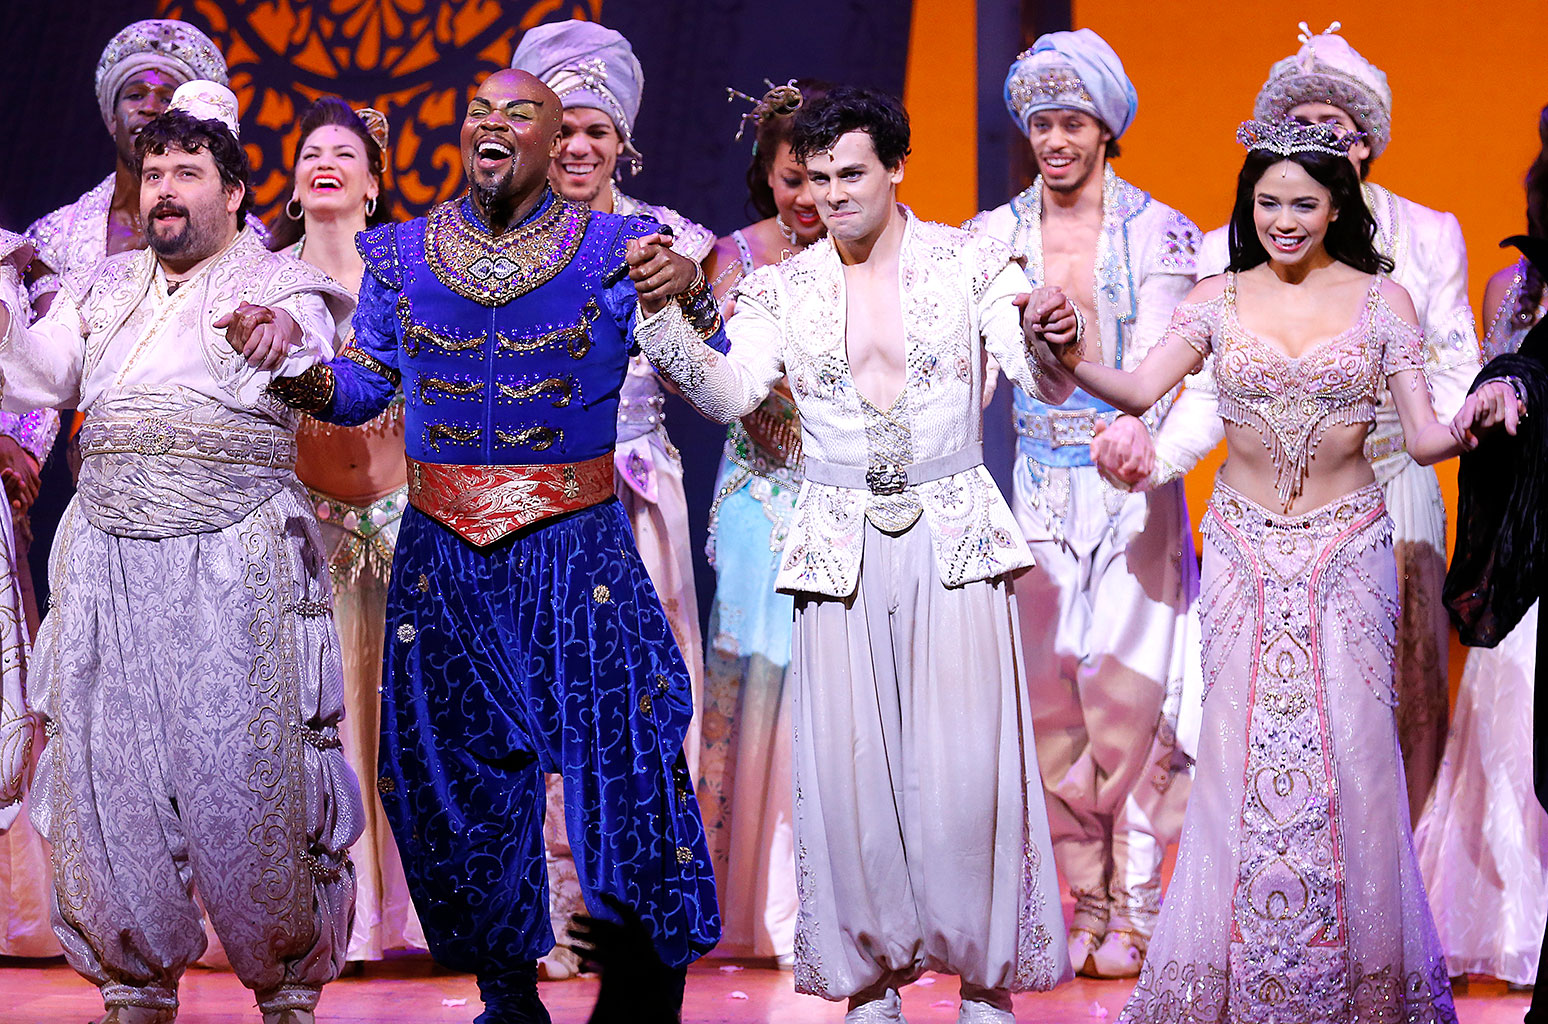 His Wish Came True! Watch This 'Aladdin' Actor's Onstage Proposal - www.billboard.com